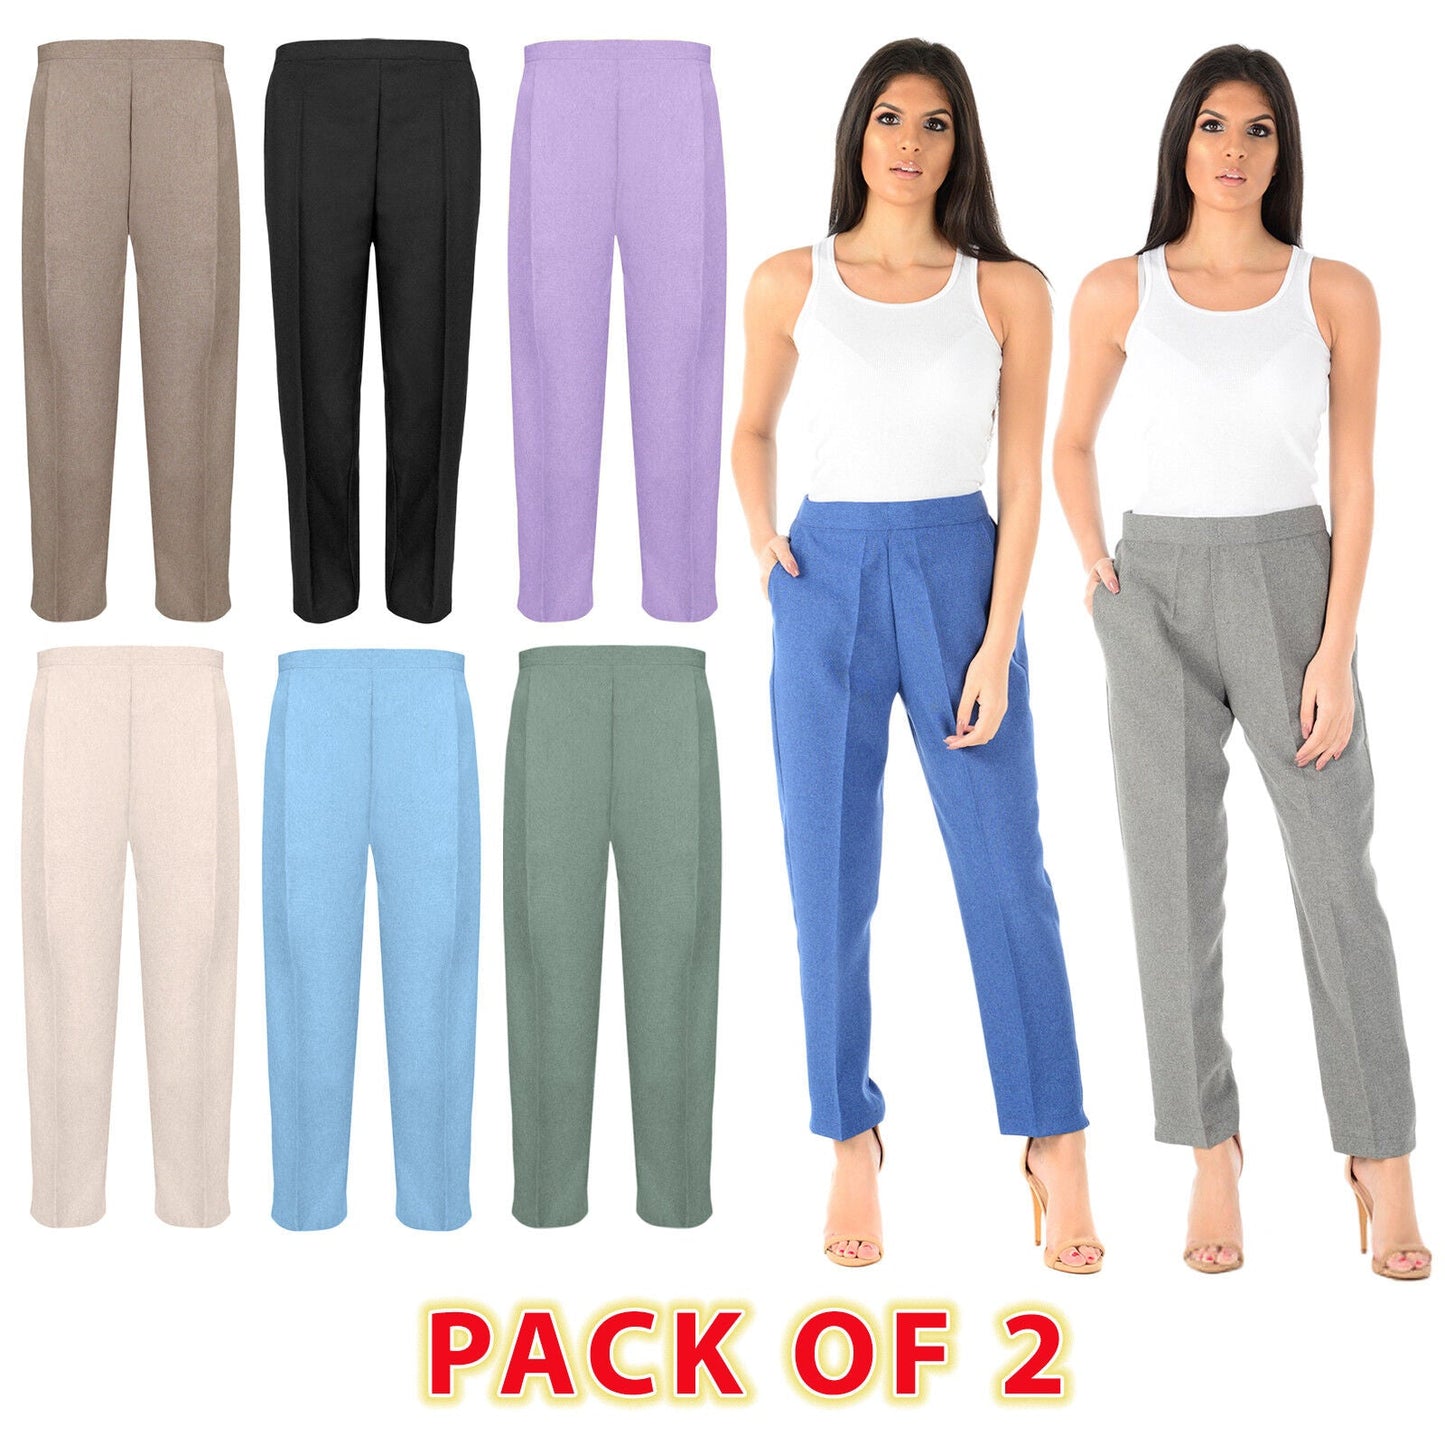 PACK OF 2 LADIES WOMENS HALF ELASTICATED WAIST TROUSERS WITH POCKETS PLUS SIZE 16 to 20